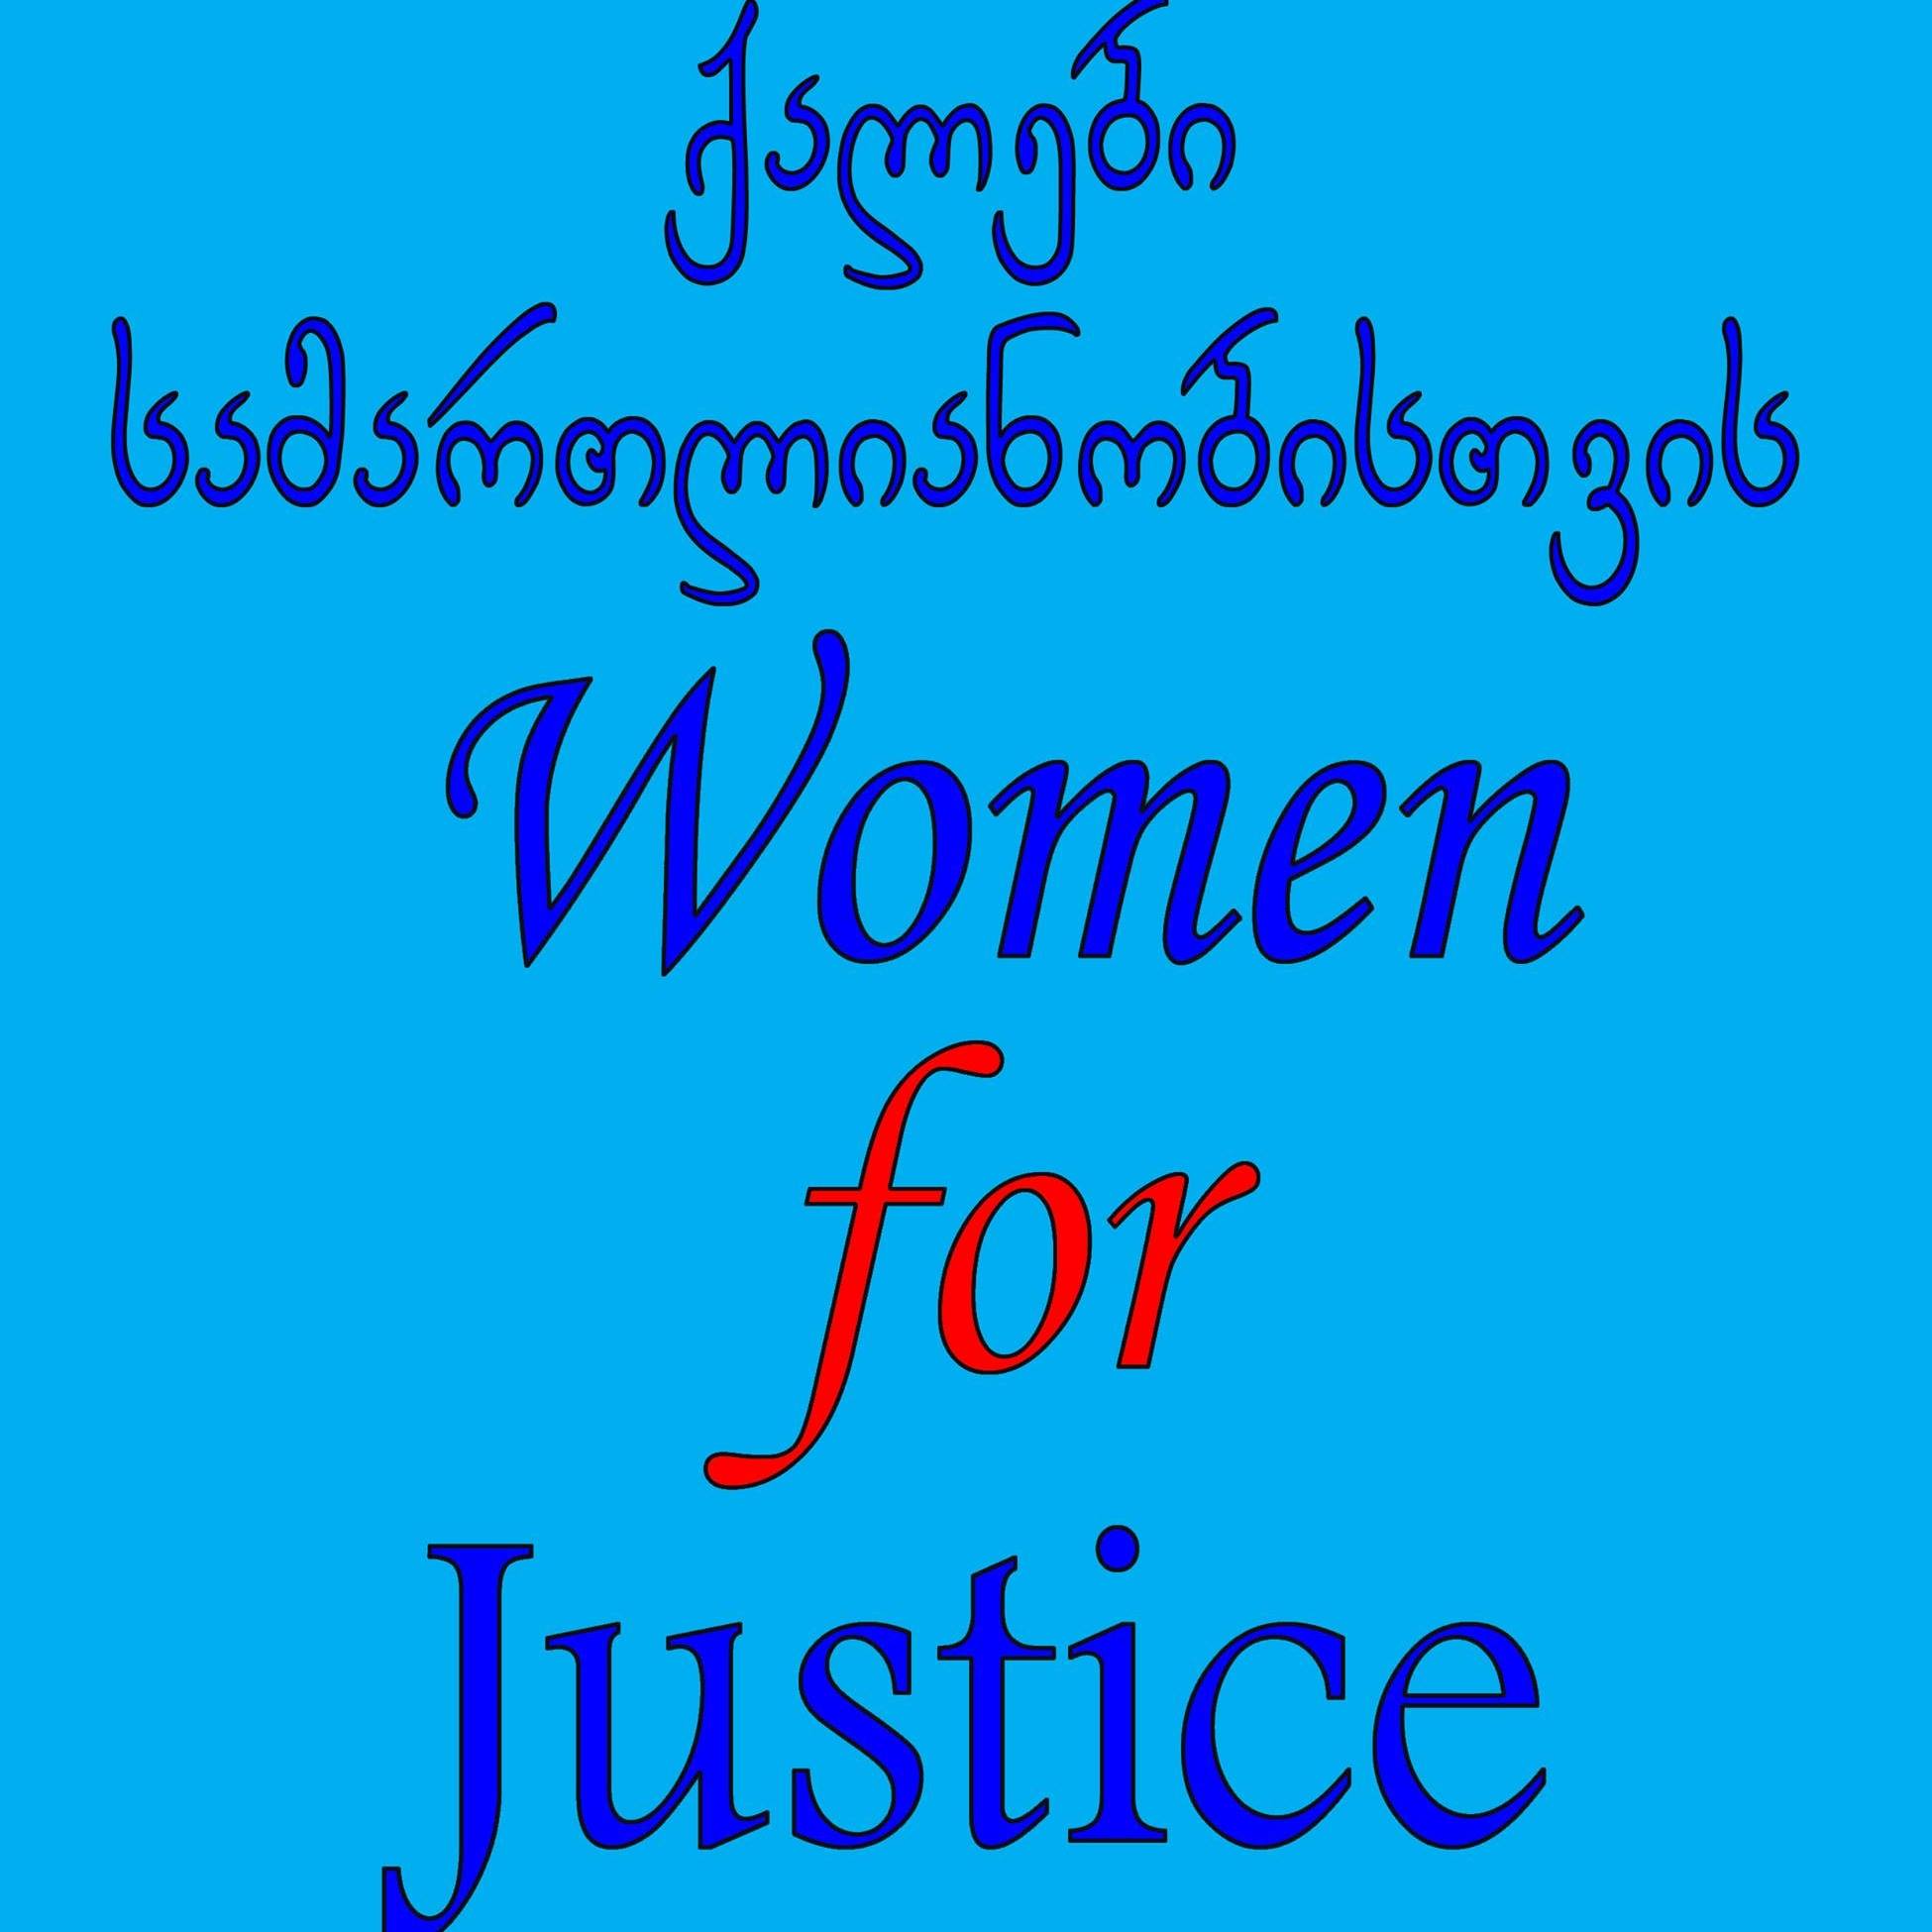 Women for Justice